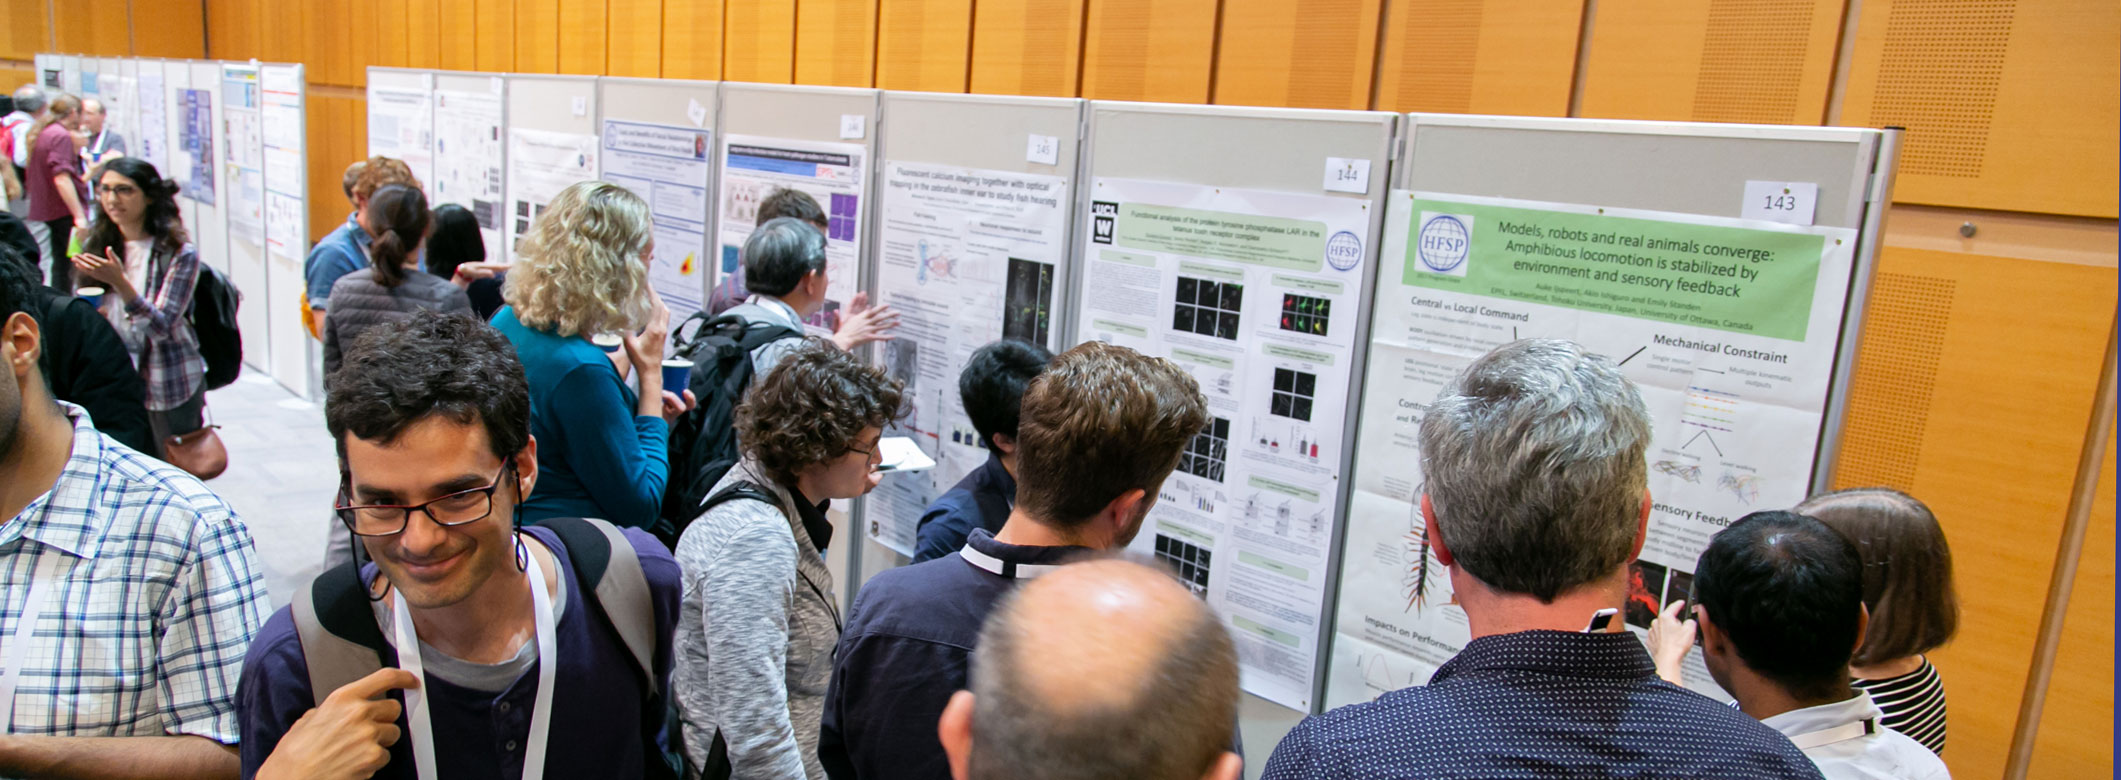 2019 AWM poster session